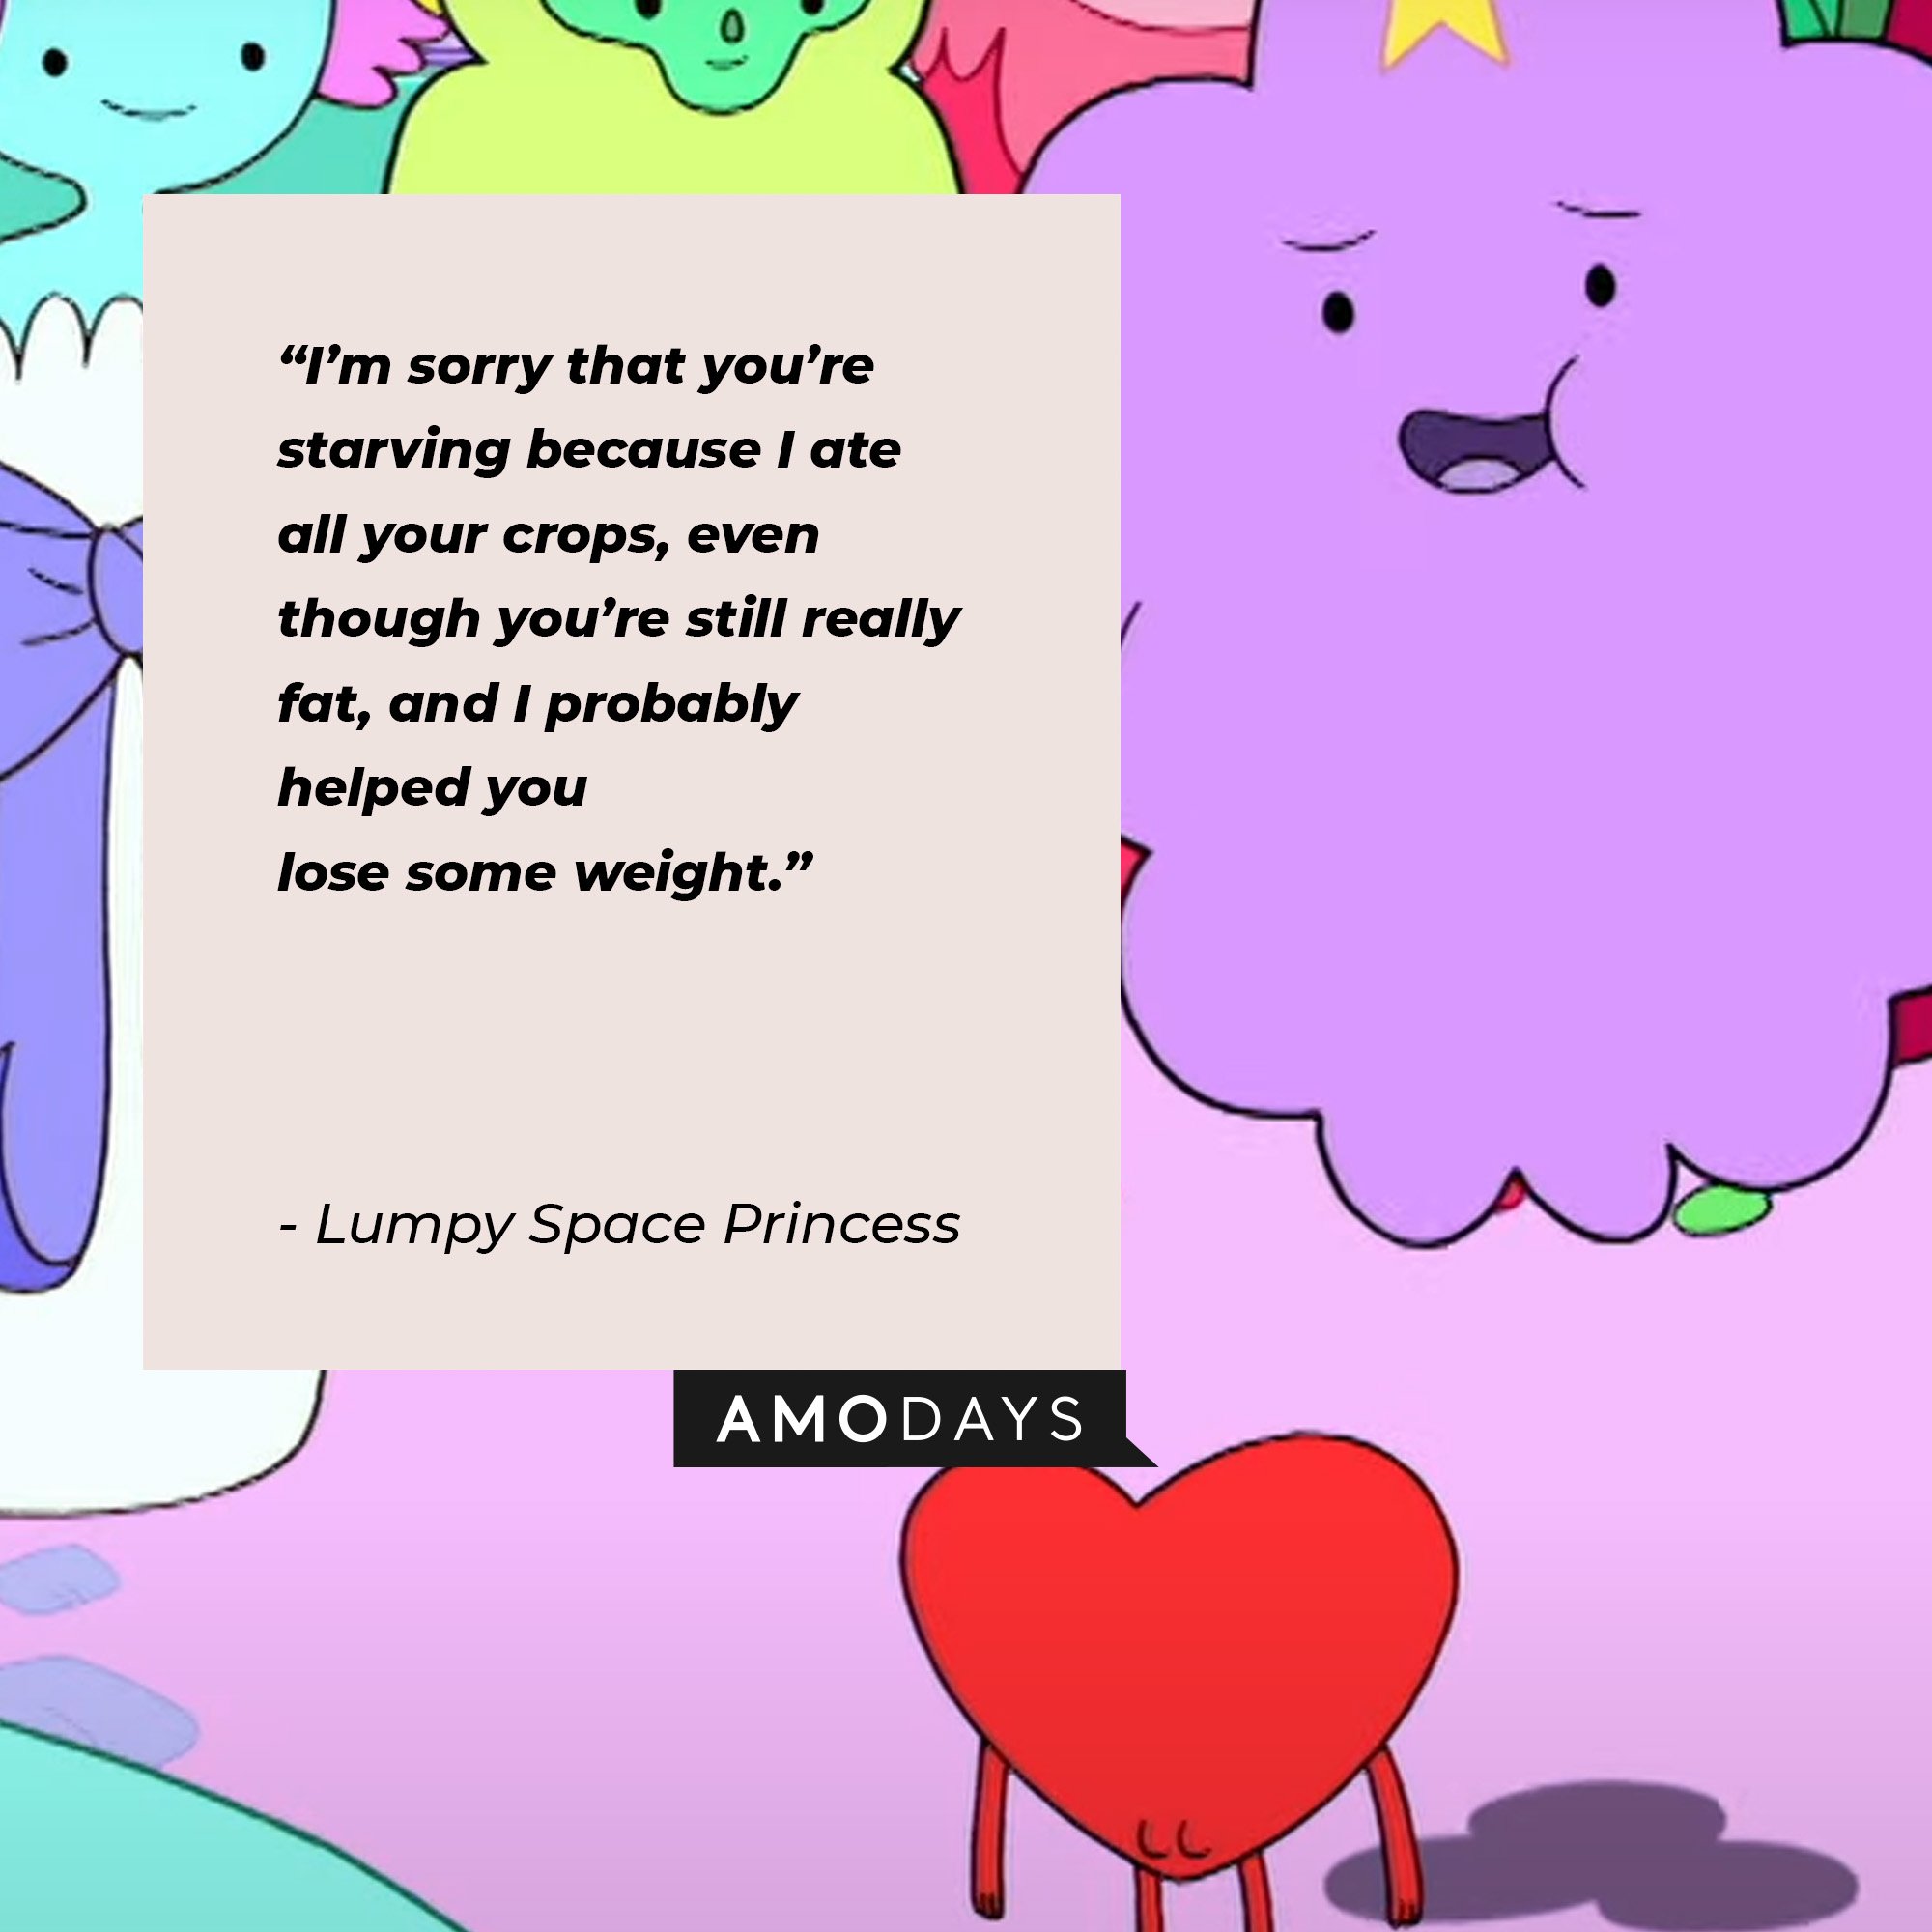 Lumpy Space Princess’ quote: “I’m sorry that you’re starving because I ate all your crops, even though you’re still really fat, and I probably helped you lose some weight.” |  Image: AmoDays